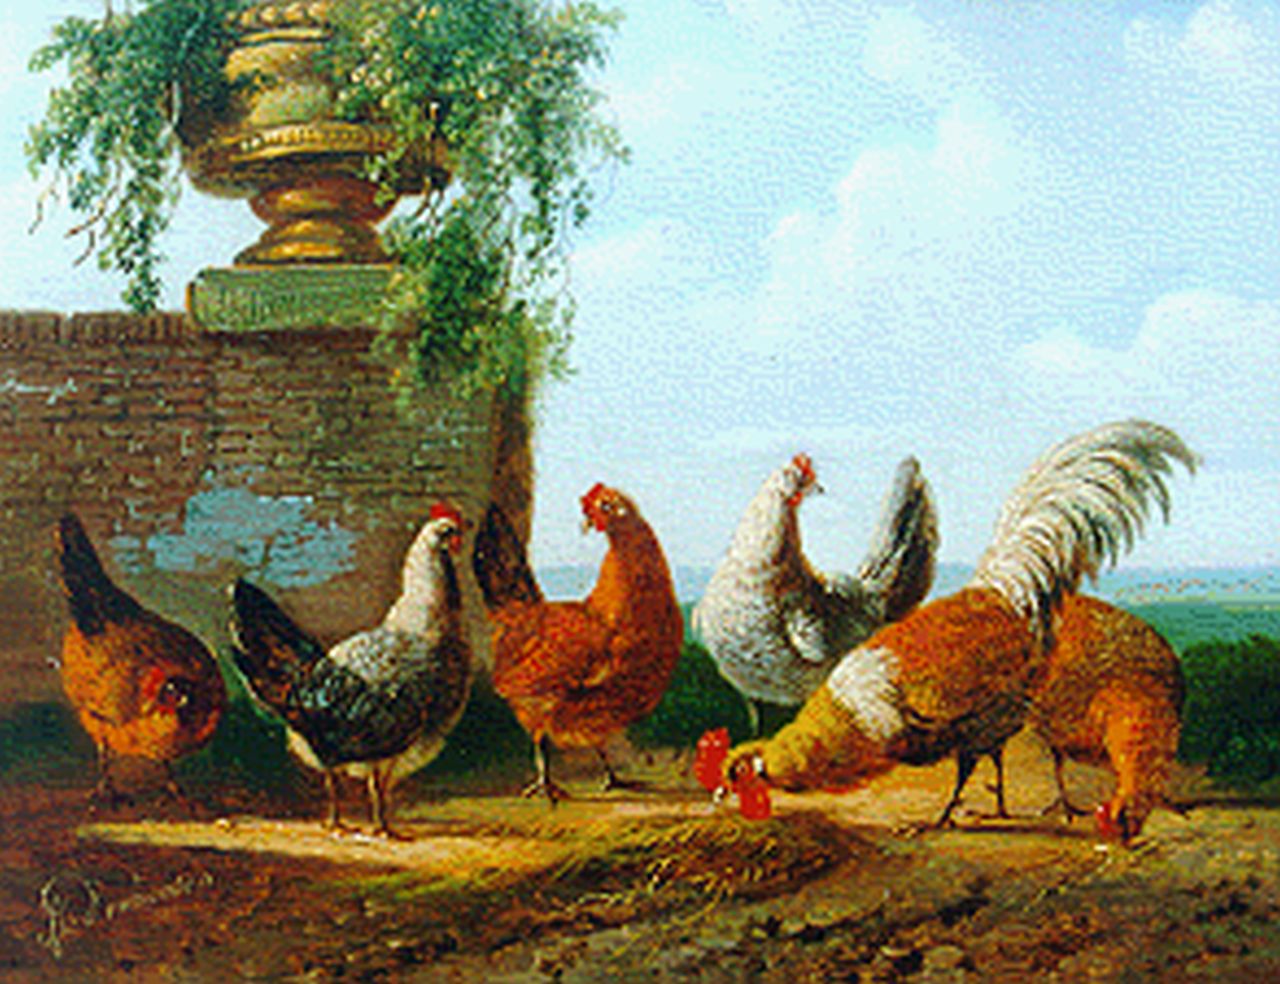 Verhoesen A.  | Albertus Verhoesen, A rooster and five chickens, oil on panel 12.5 x 15.5 cm, signed l.l.